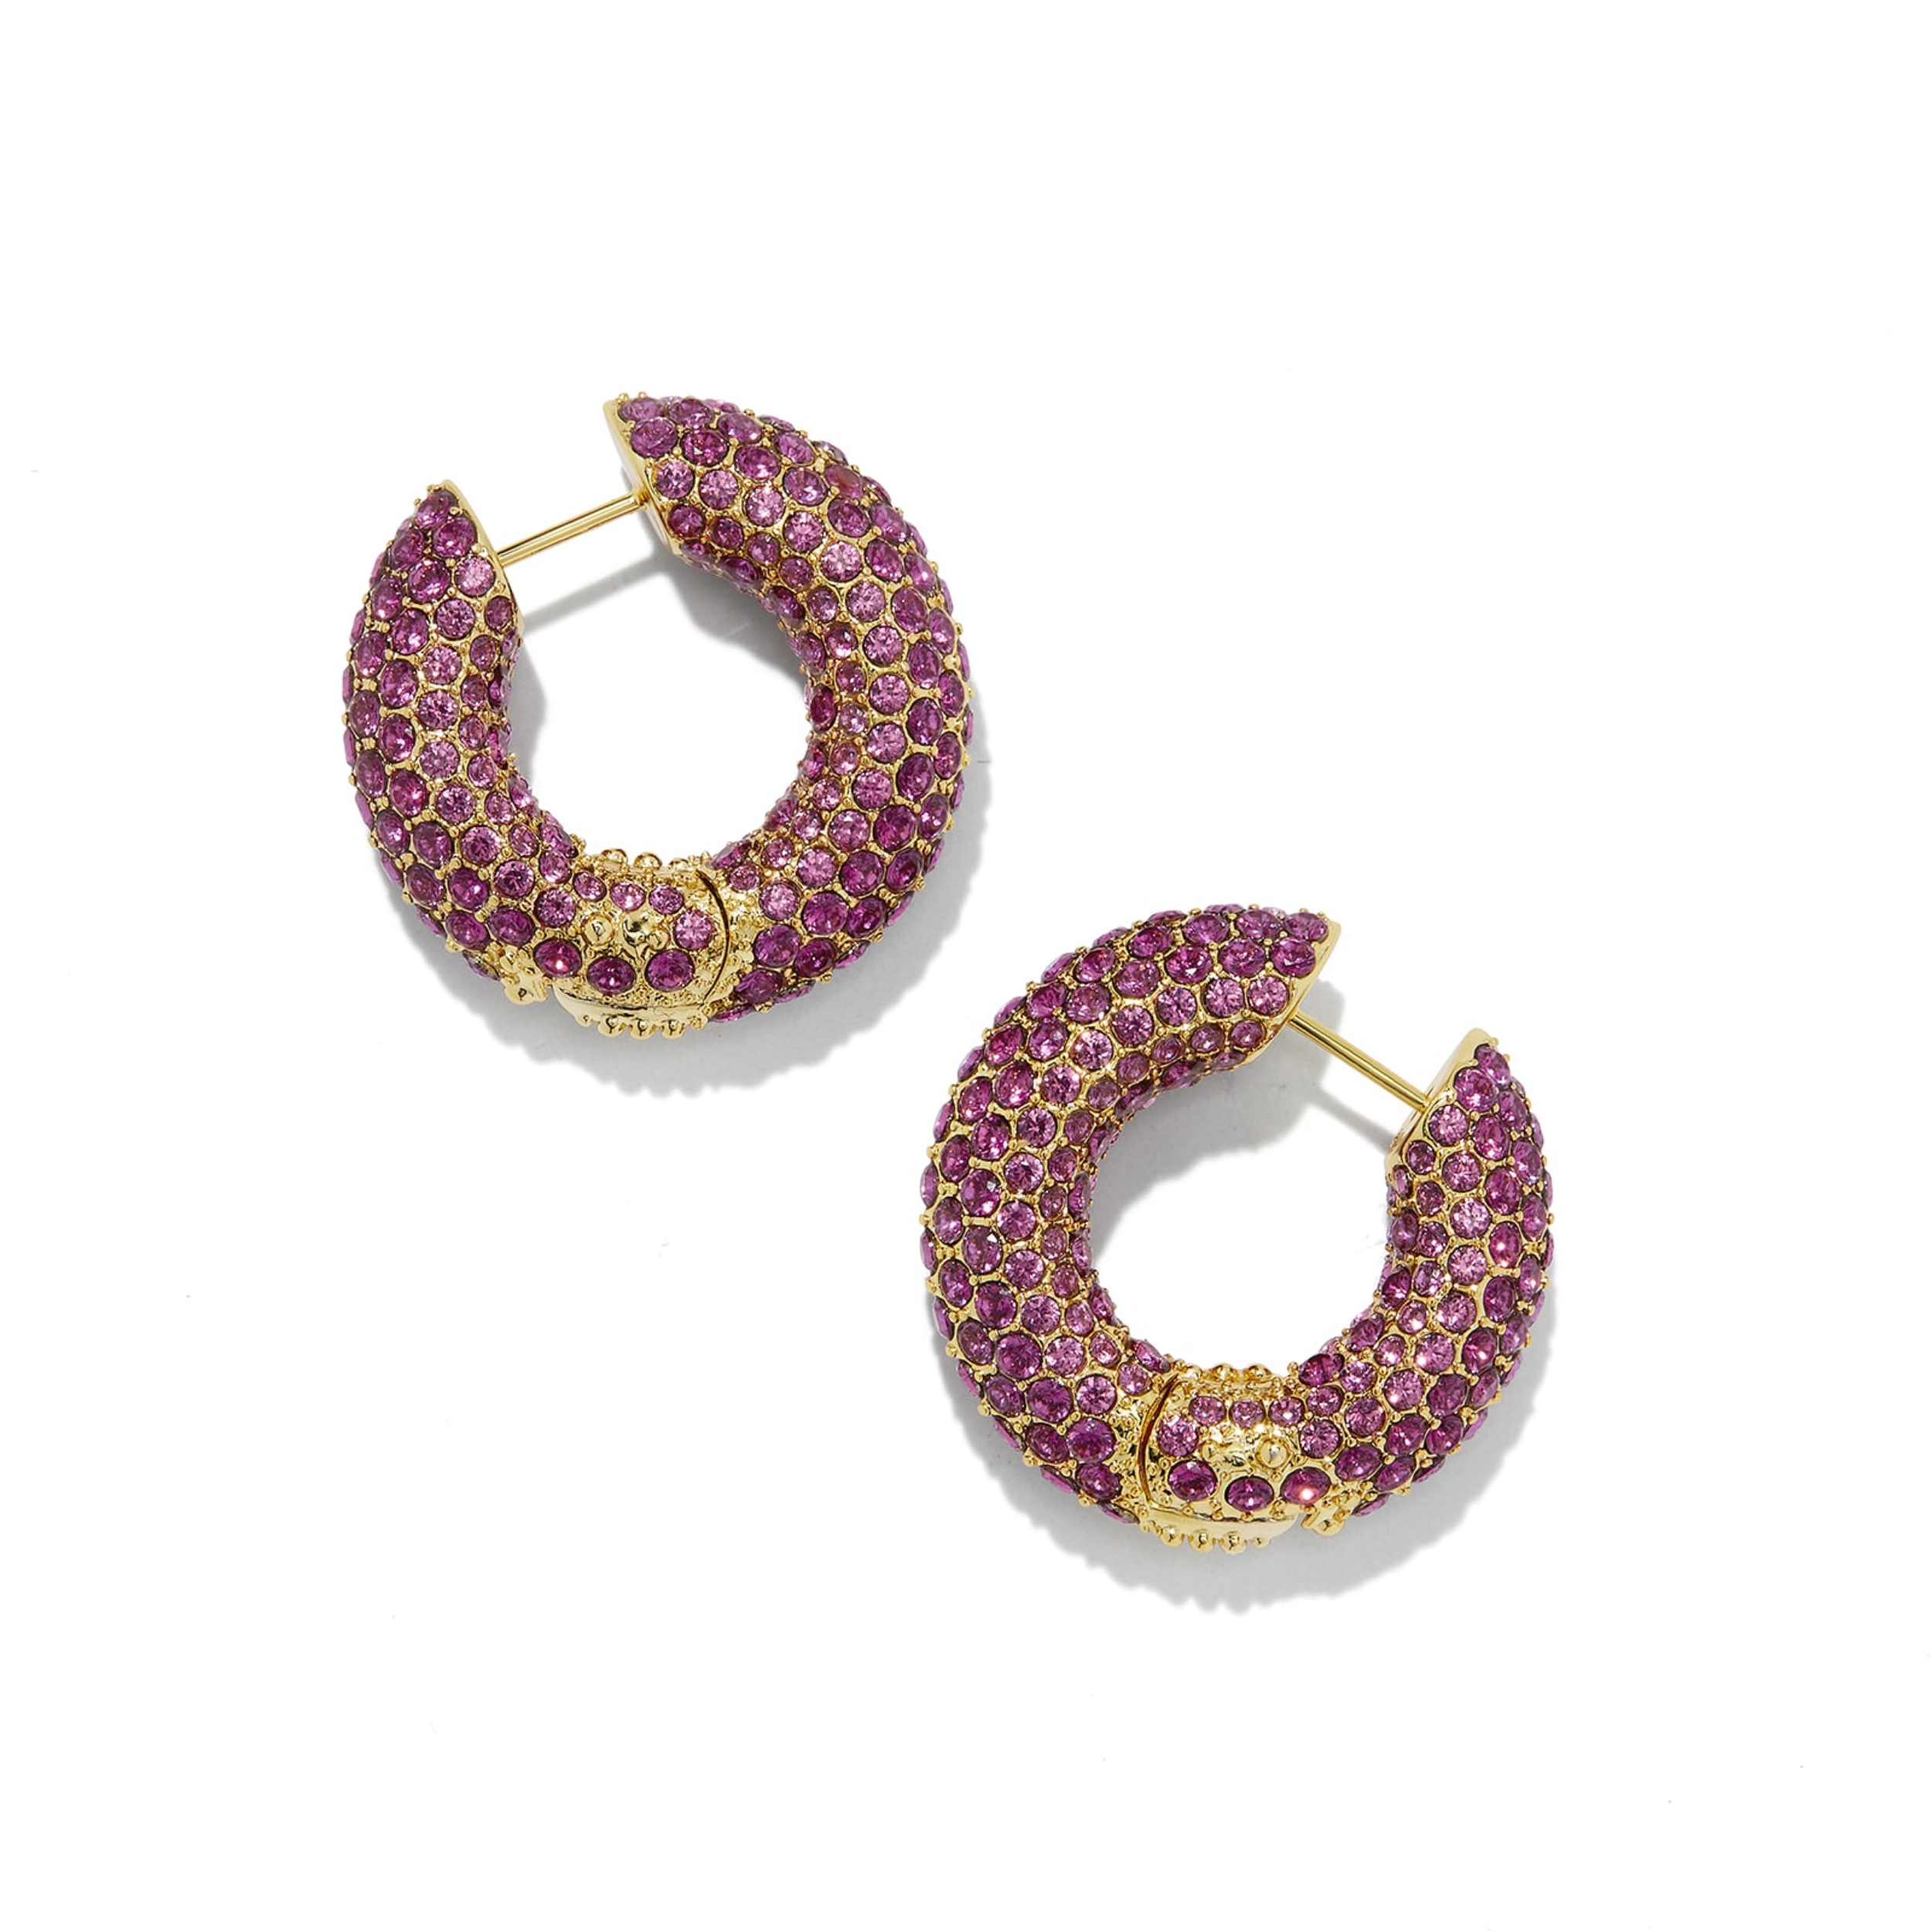 Kendra Scott | Mikki Pave Gold Hoop Earrings In Cranberry Crystal (Pink) - Giddy Up Glamour Boutique